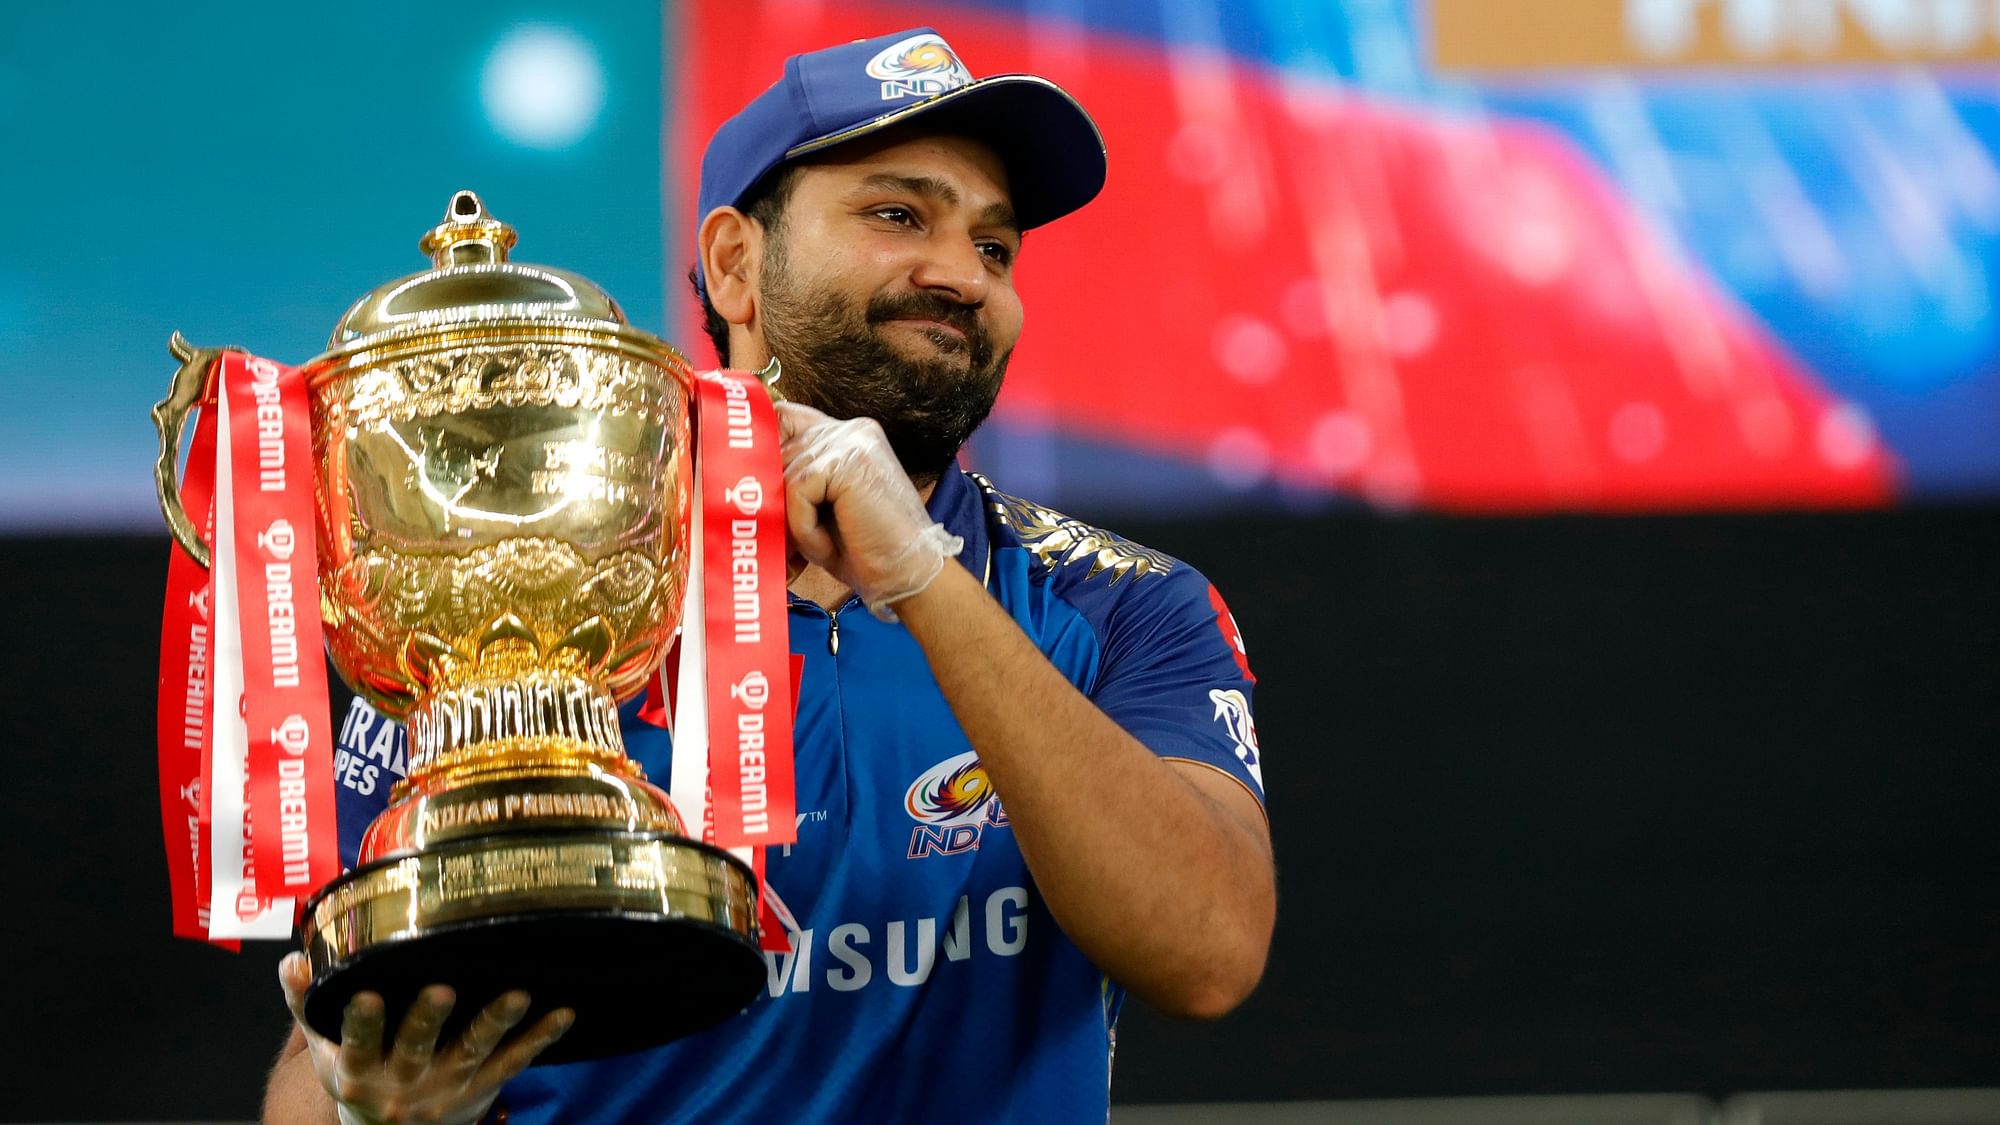 Top Performances from the IPL 2020 Final Mumbai Indians Crowned Champions